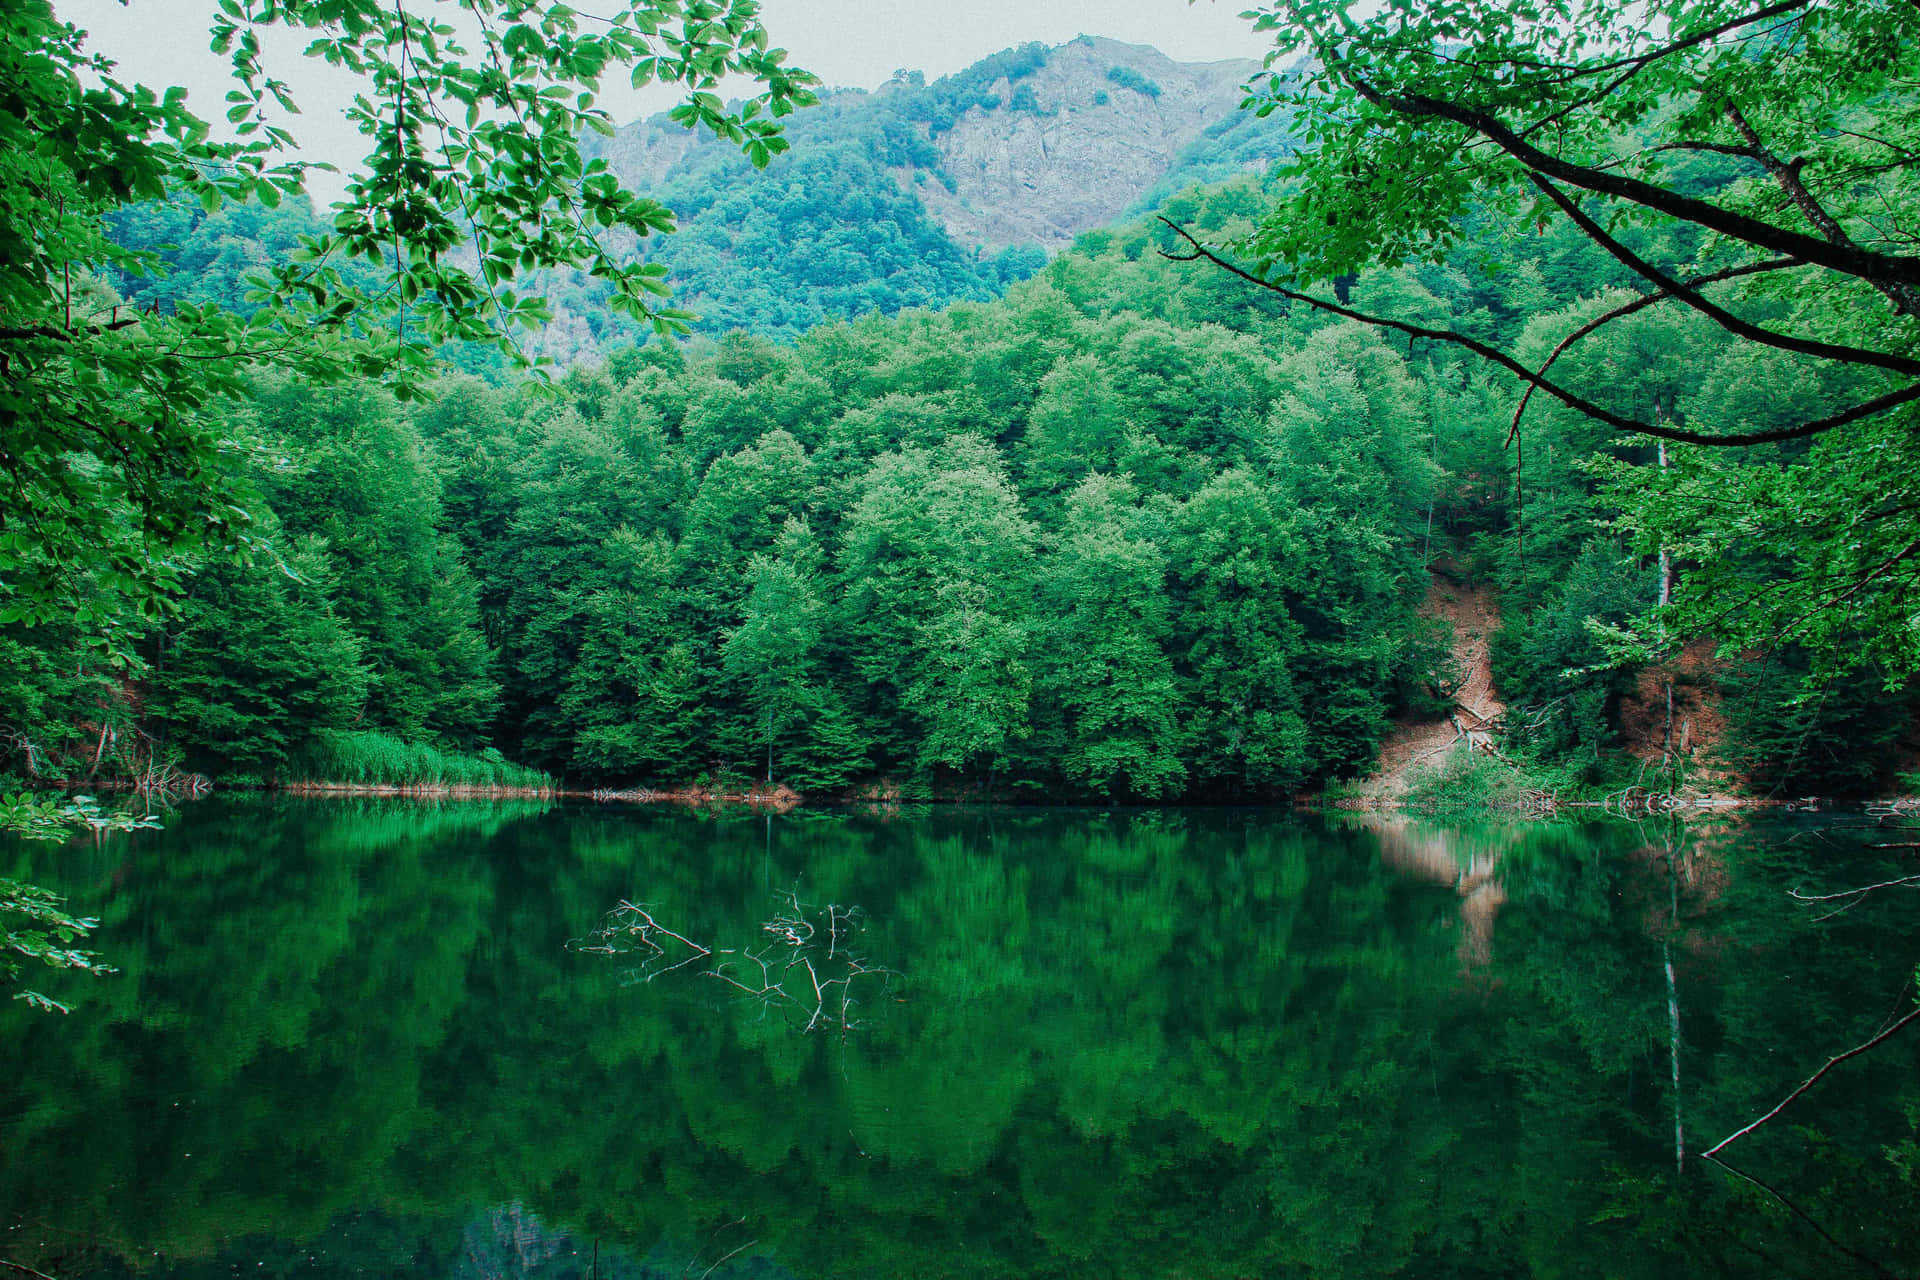 A Lake Surrounded By Green Trees And Mountains